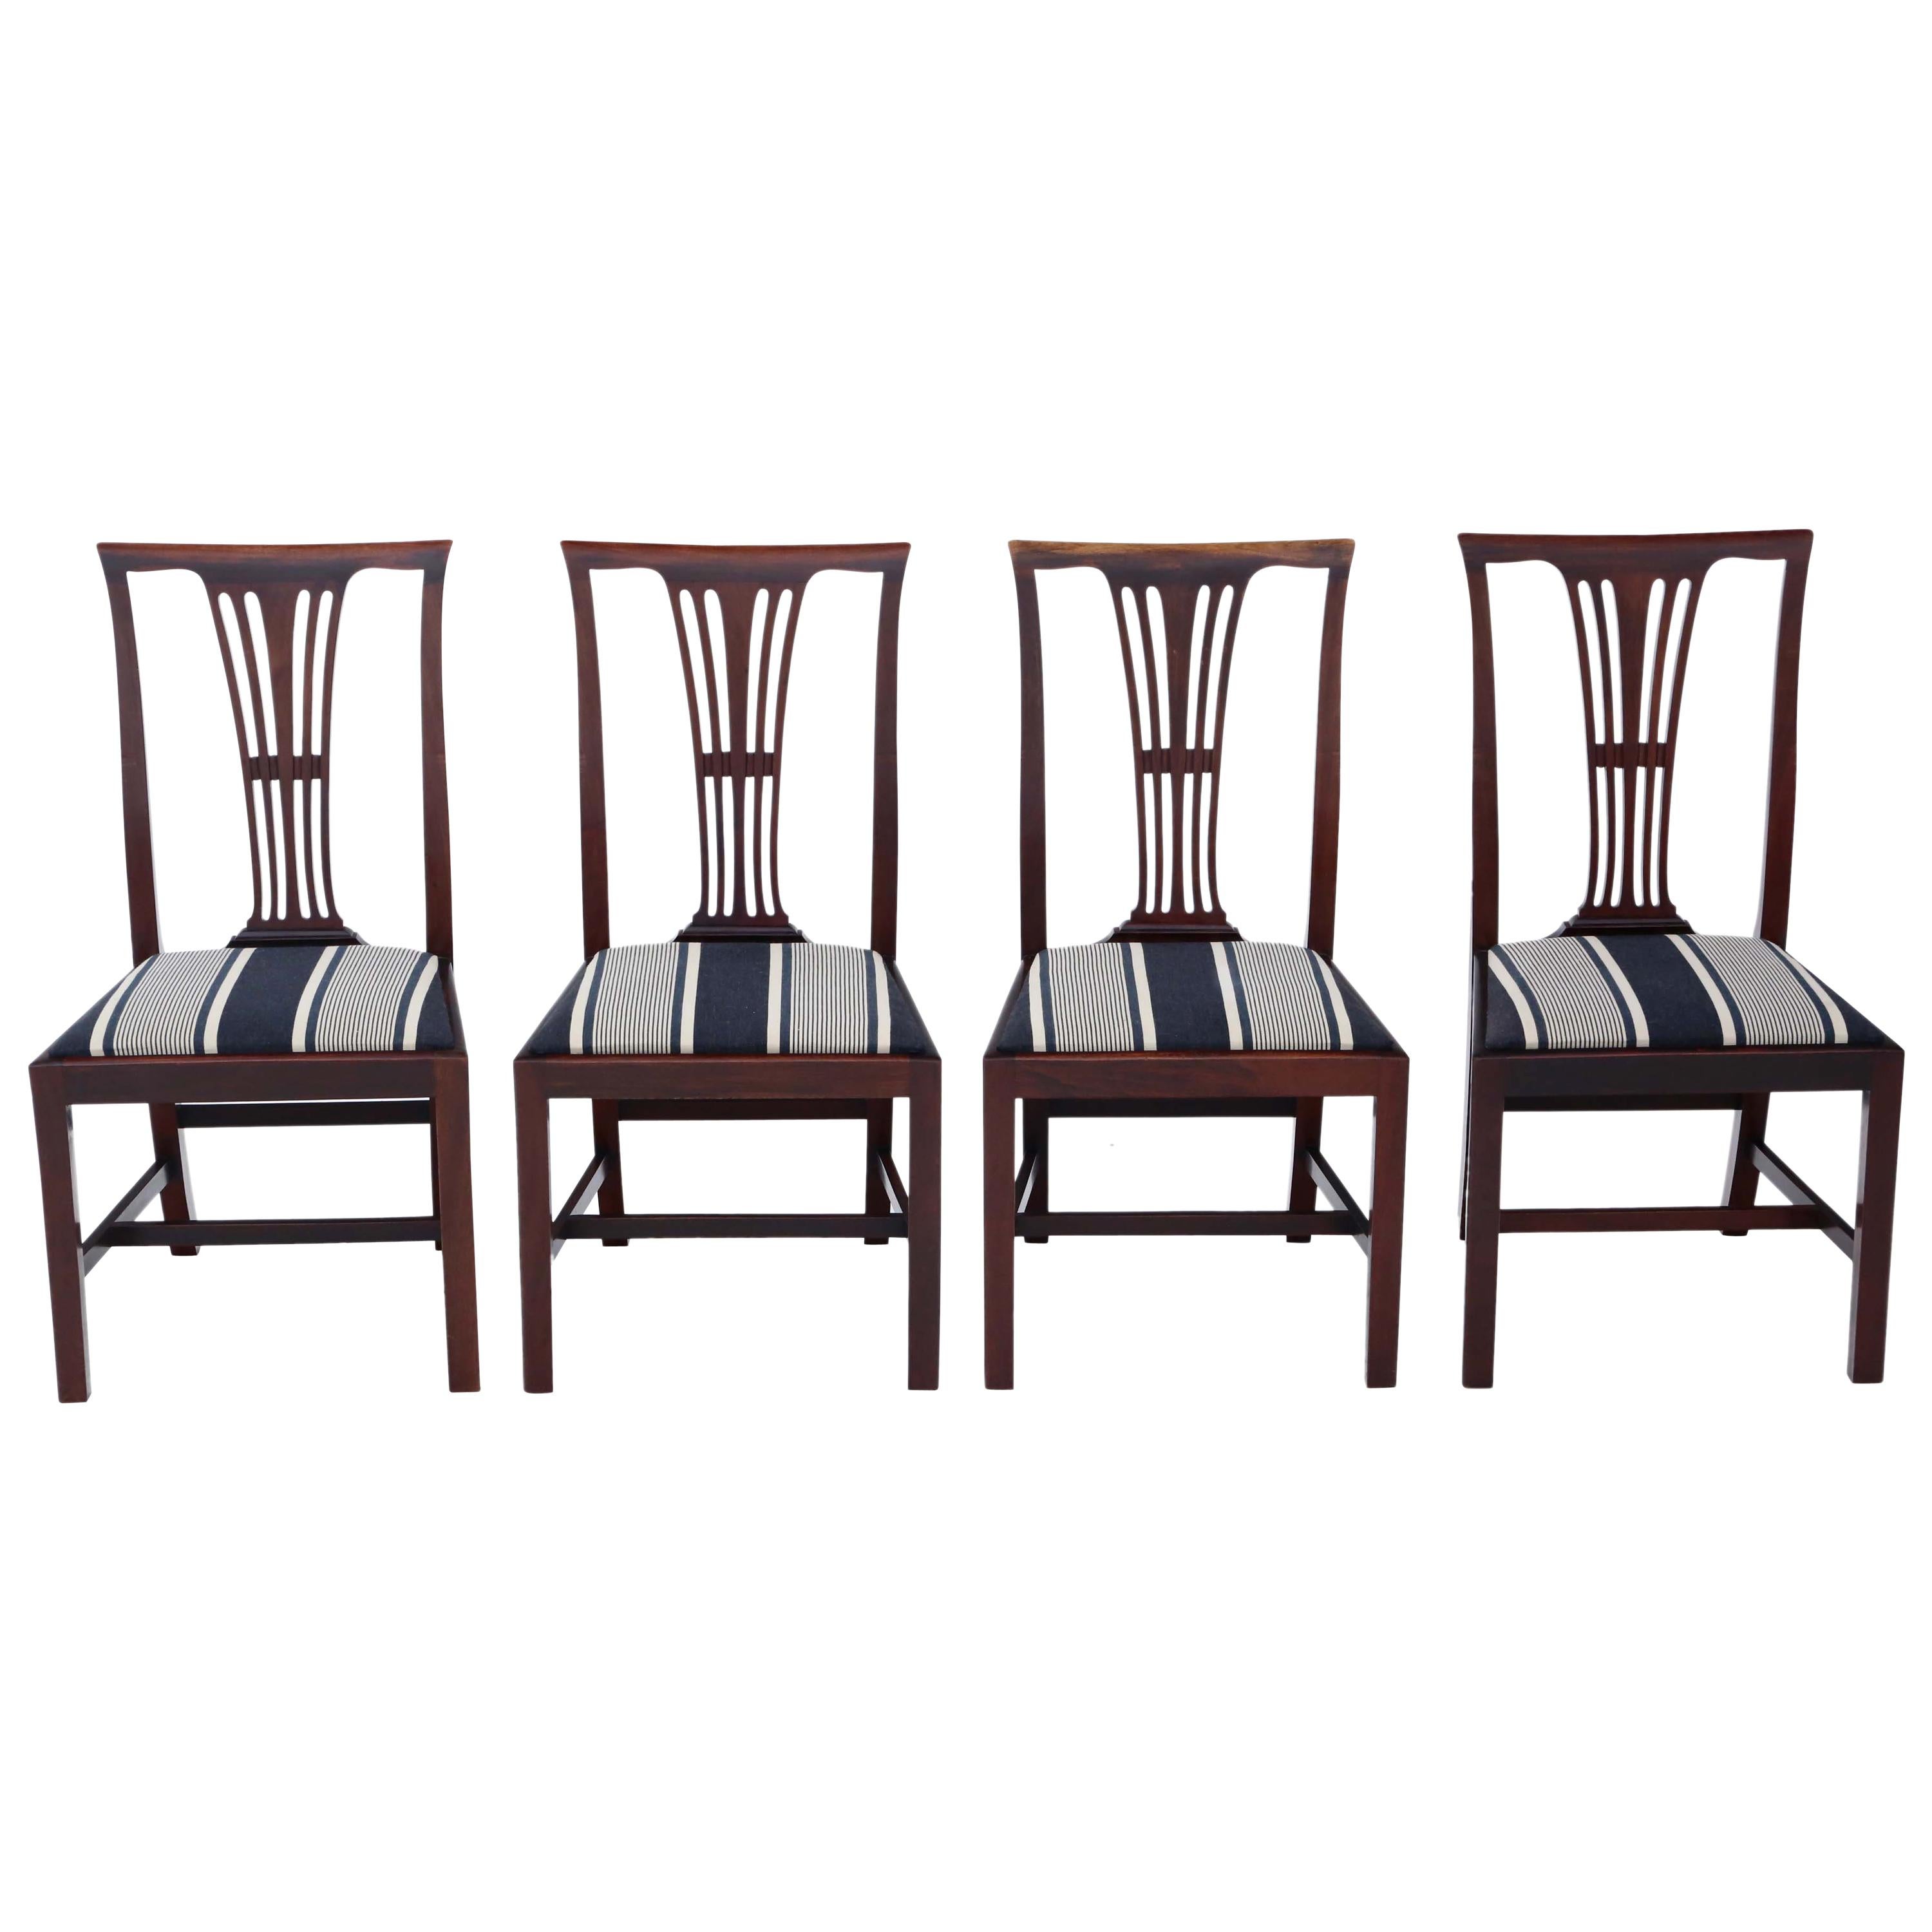 Antique Quality Set of 4 Victorian circa 1900 Mahogany Dining Chairs